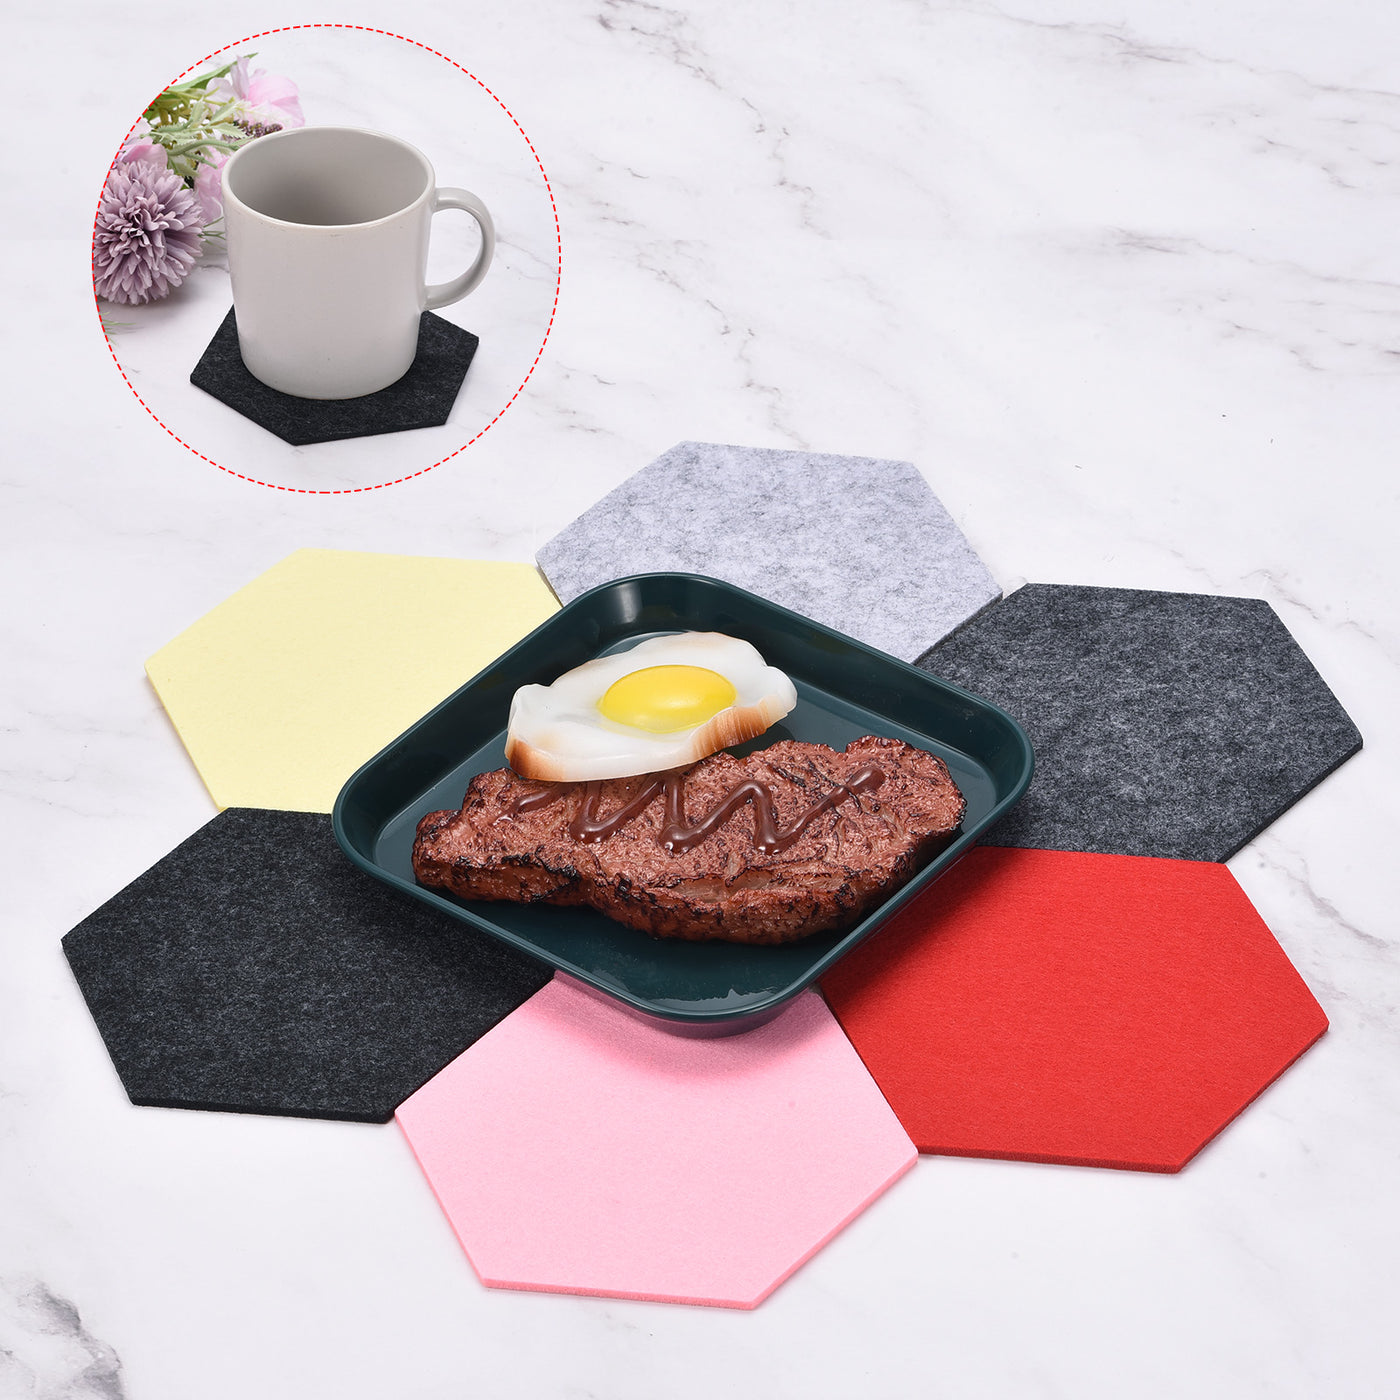 uxcell Uxcell Felt Coasters 9pcs Absorbent Pad Coaster for Drink Cup Pot Bowl Vase Wine Red